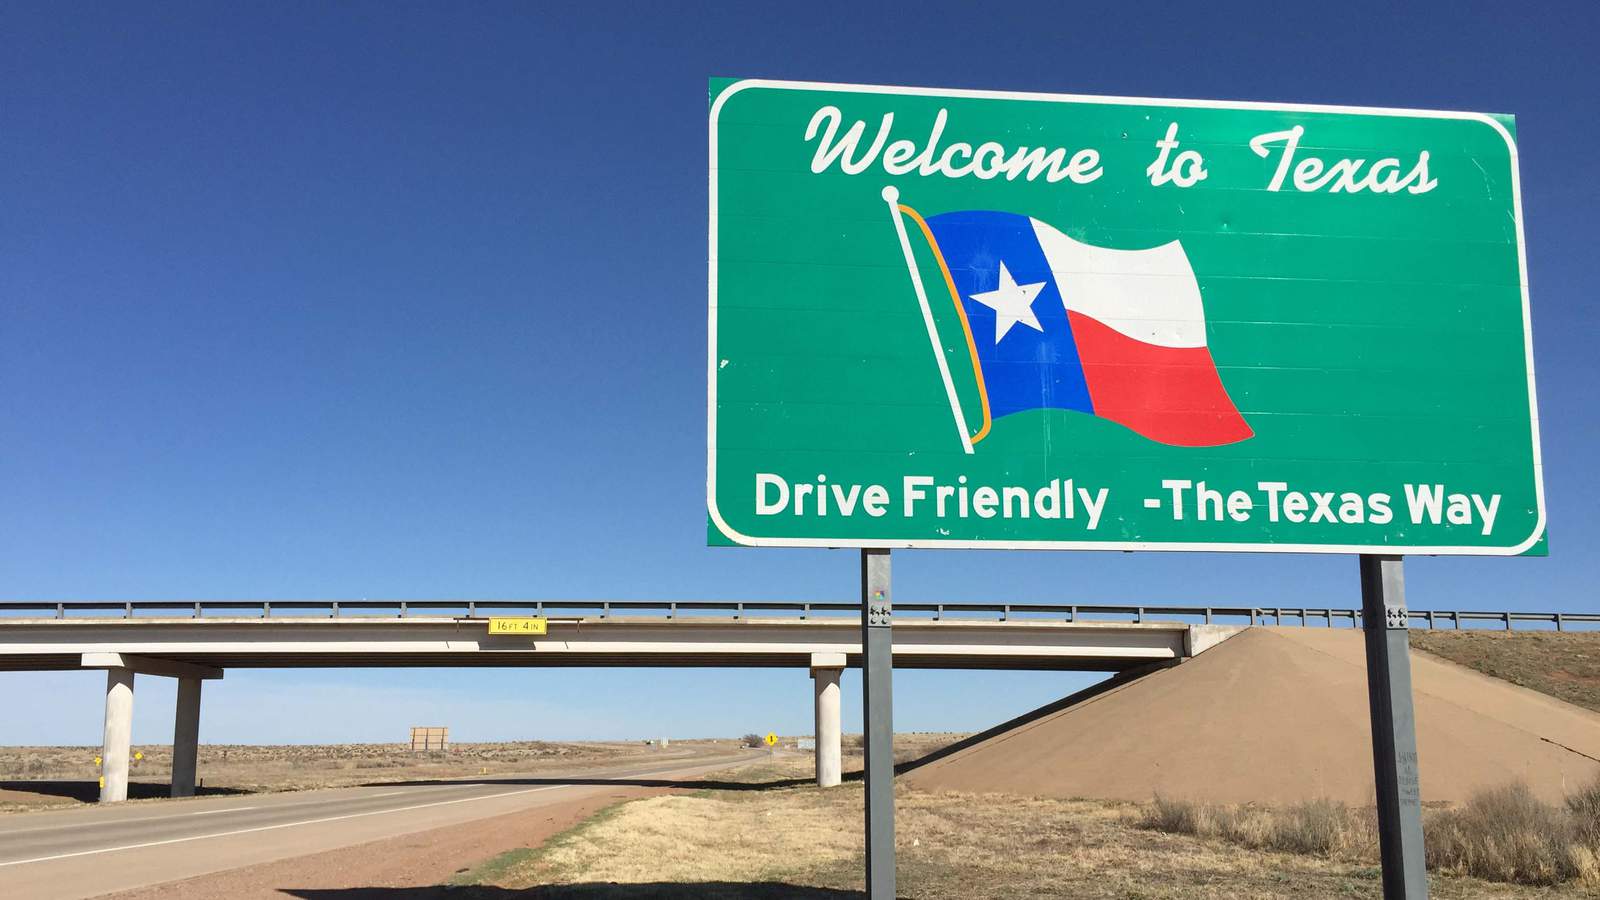 Howdy, y’all: Texas was second-most moved to state in 2020, survey finds